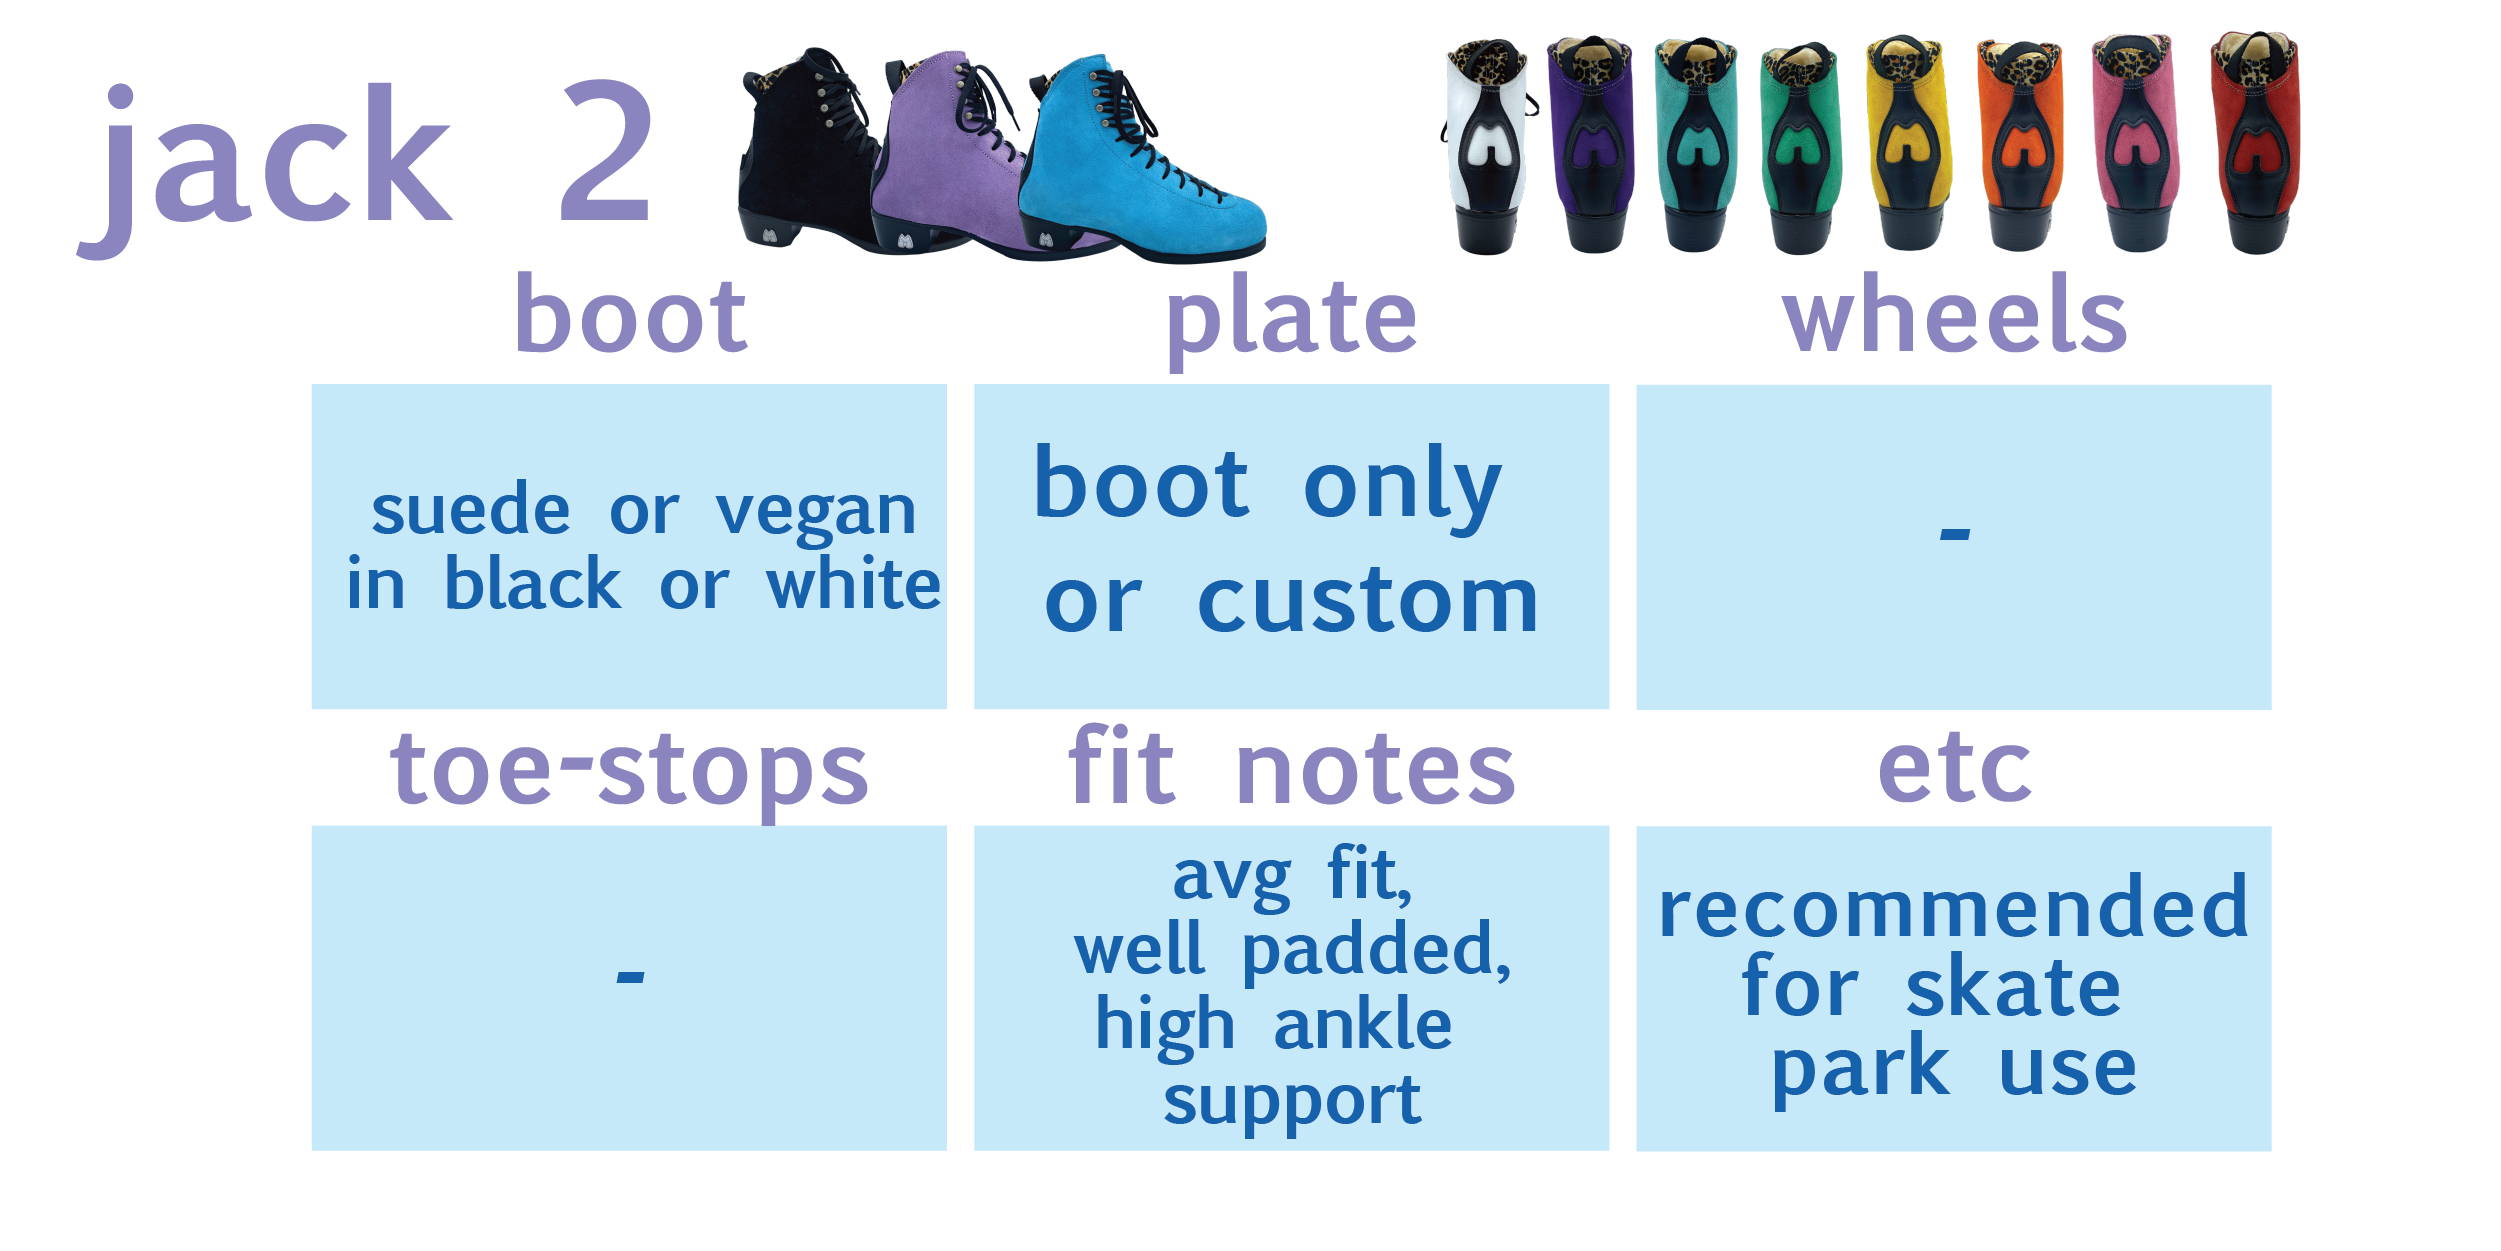 table of jack 2 information with photo of blue jack 2, boot only:  boot: suede or vegan in black or white, fit notes: avg fit, well padded with high ankle support